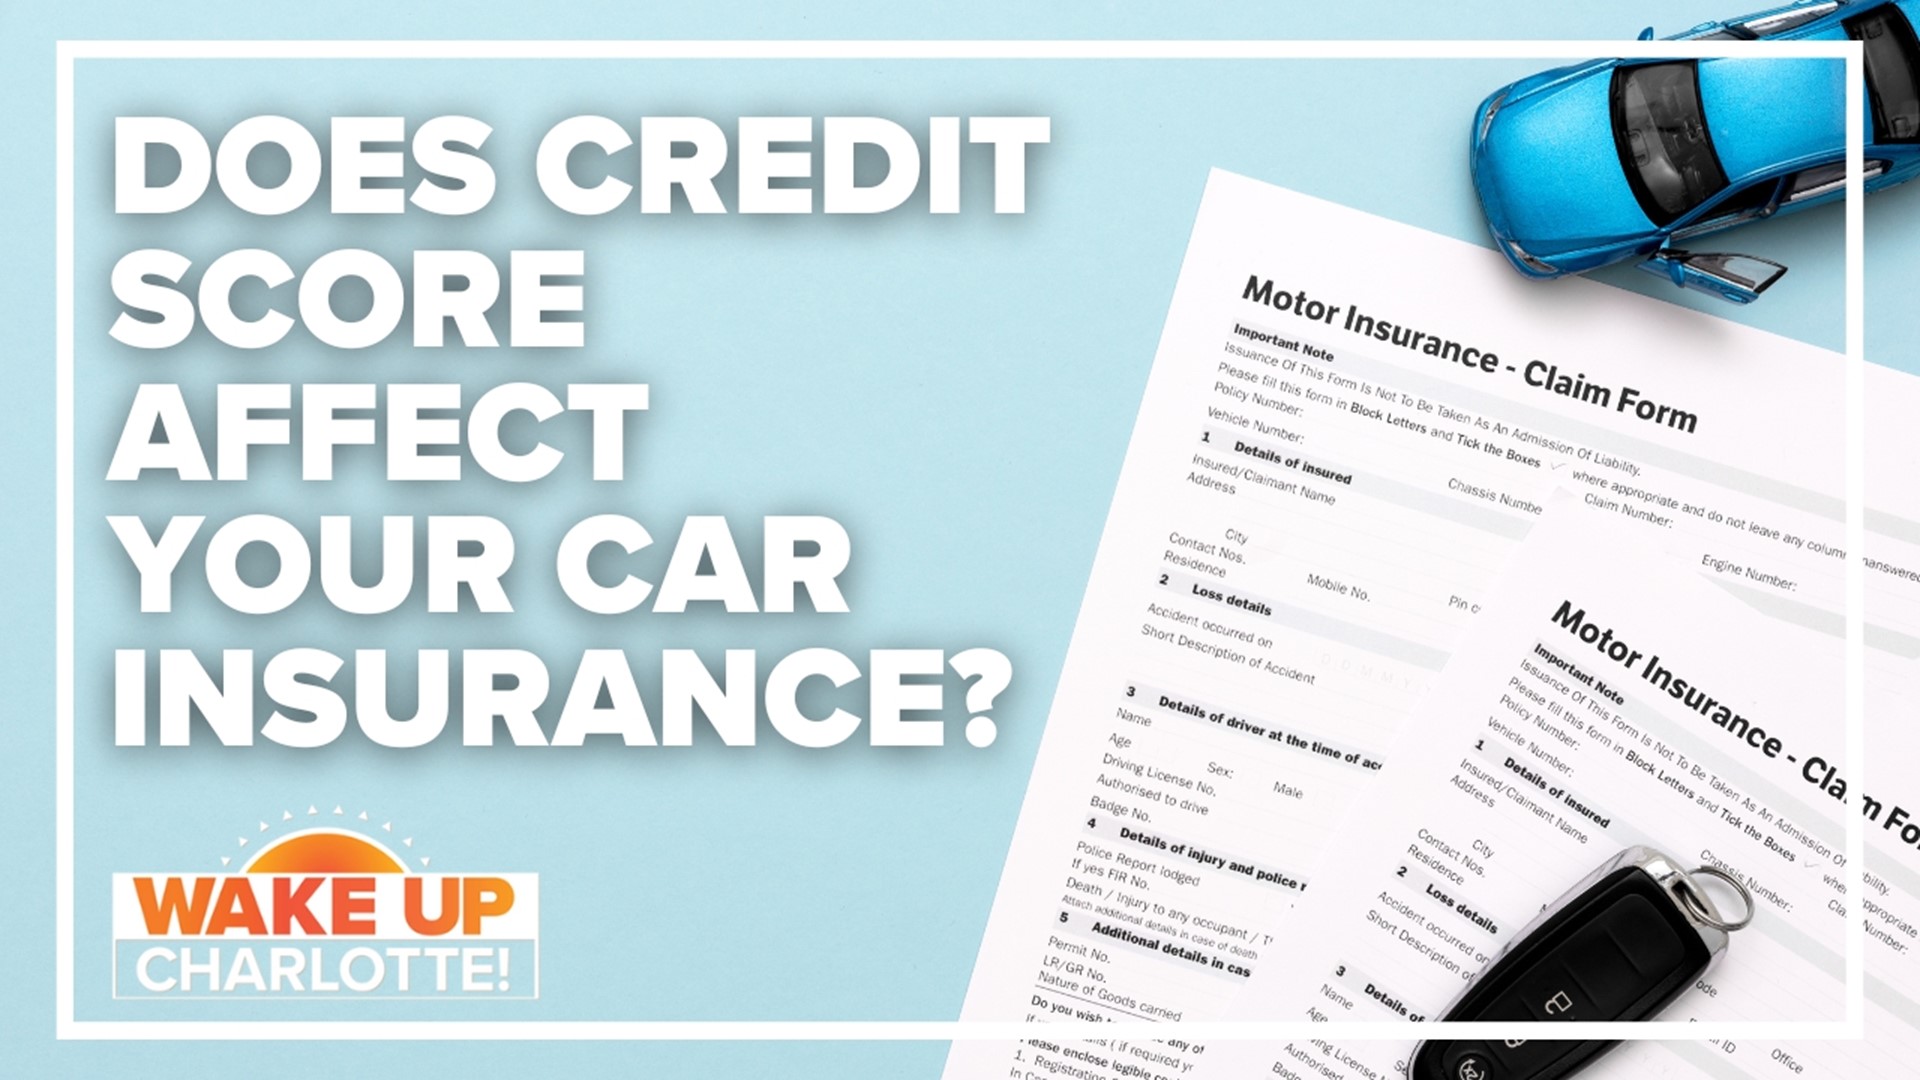 Verifying whether credit score can be a factor in the cost of your insurance